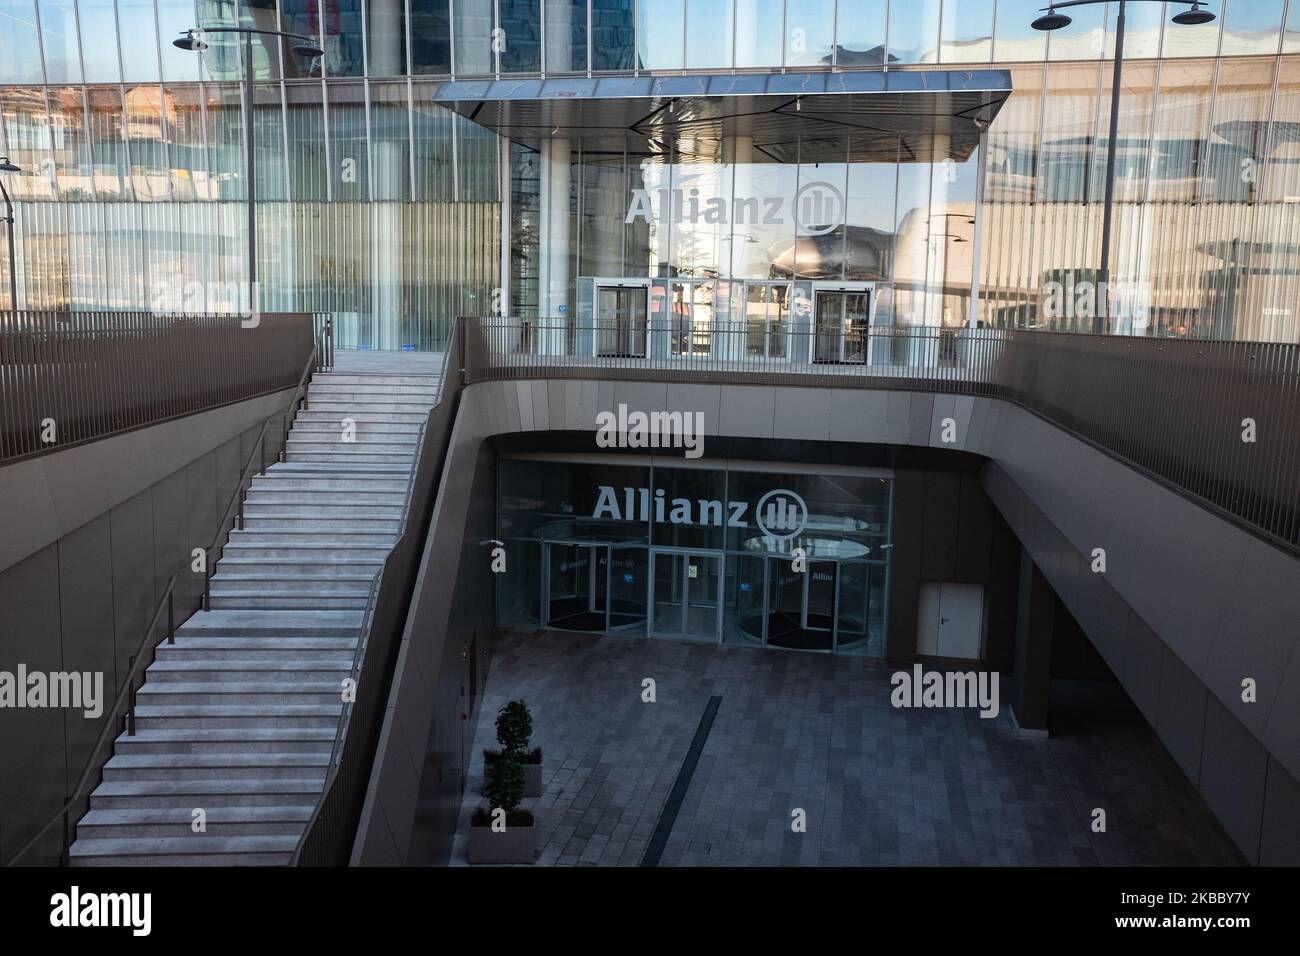 View of entrance of Allianz Tower in Milano, Italy, November 30 2019. CityLife is a residential, commercial and business district under construction situated a short distance from the old city centre of Milan, Italy; it has an area of 36.6 hectares (90 acres). The development is being carried out by a company controlled by Generali Group, that won the international tender for the redevelopment of the historic neighborhood of Fiera Milano with an offer of 523 million. The project is designed by famous architects Zaha Hadid, Arata Isozaki and Daniel Libeskind. (Photo by Mairo Cinquetti/NurPhoto) Stock Photo